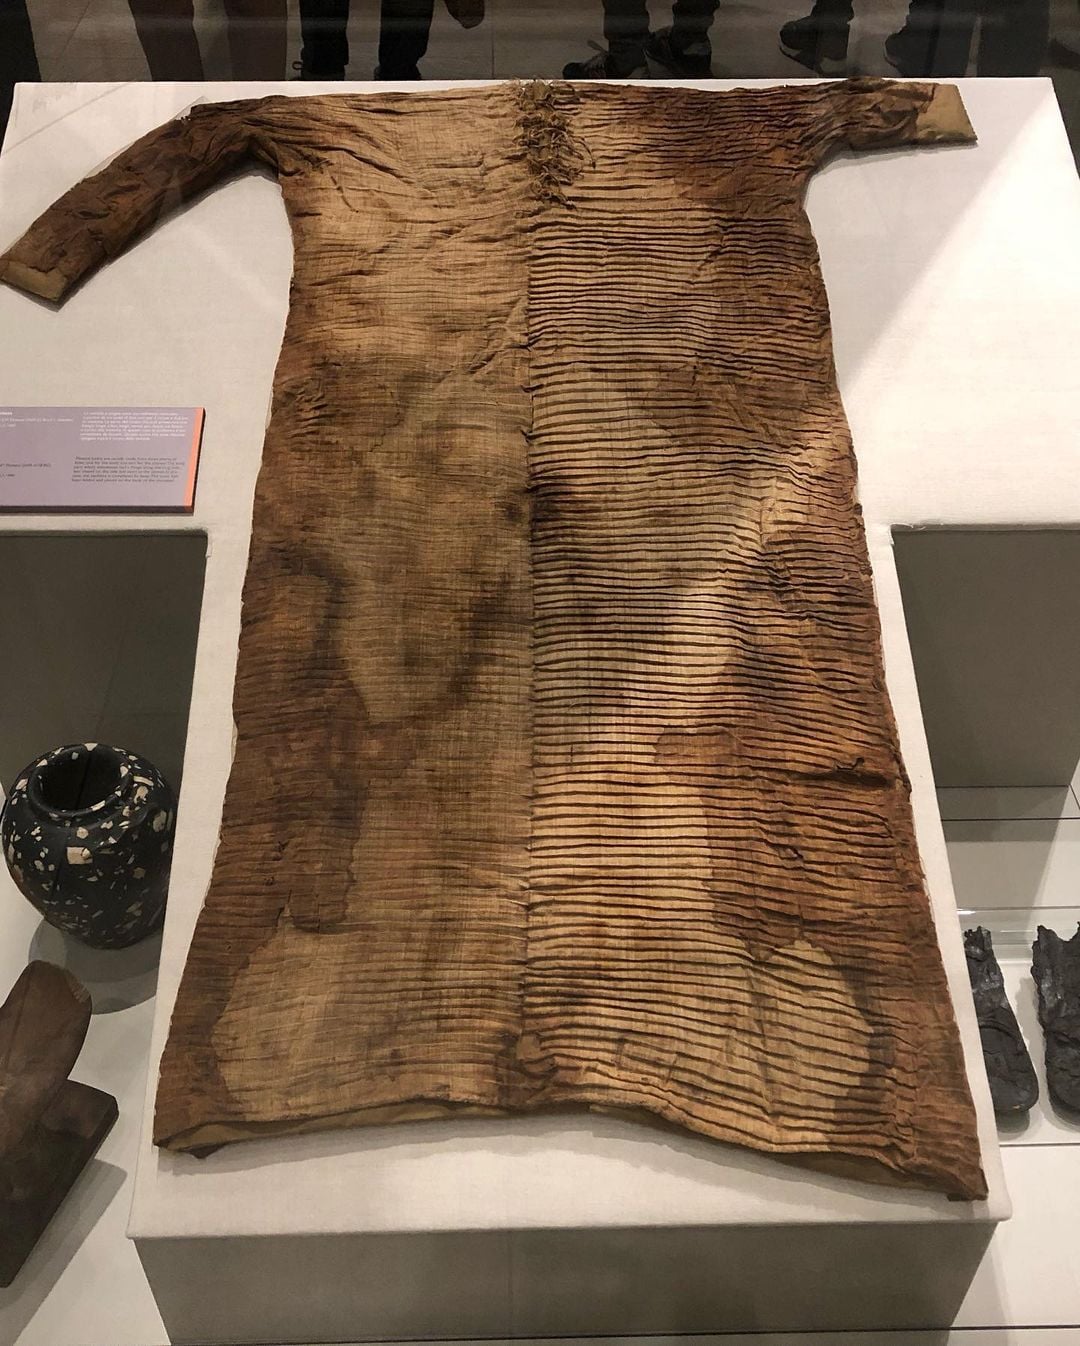 An Incredible 4,500-Year-Old (!) Ancient Egyptian Tunic. The Egyptian Museum, Cairo